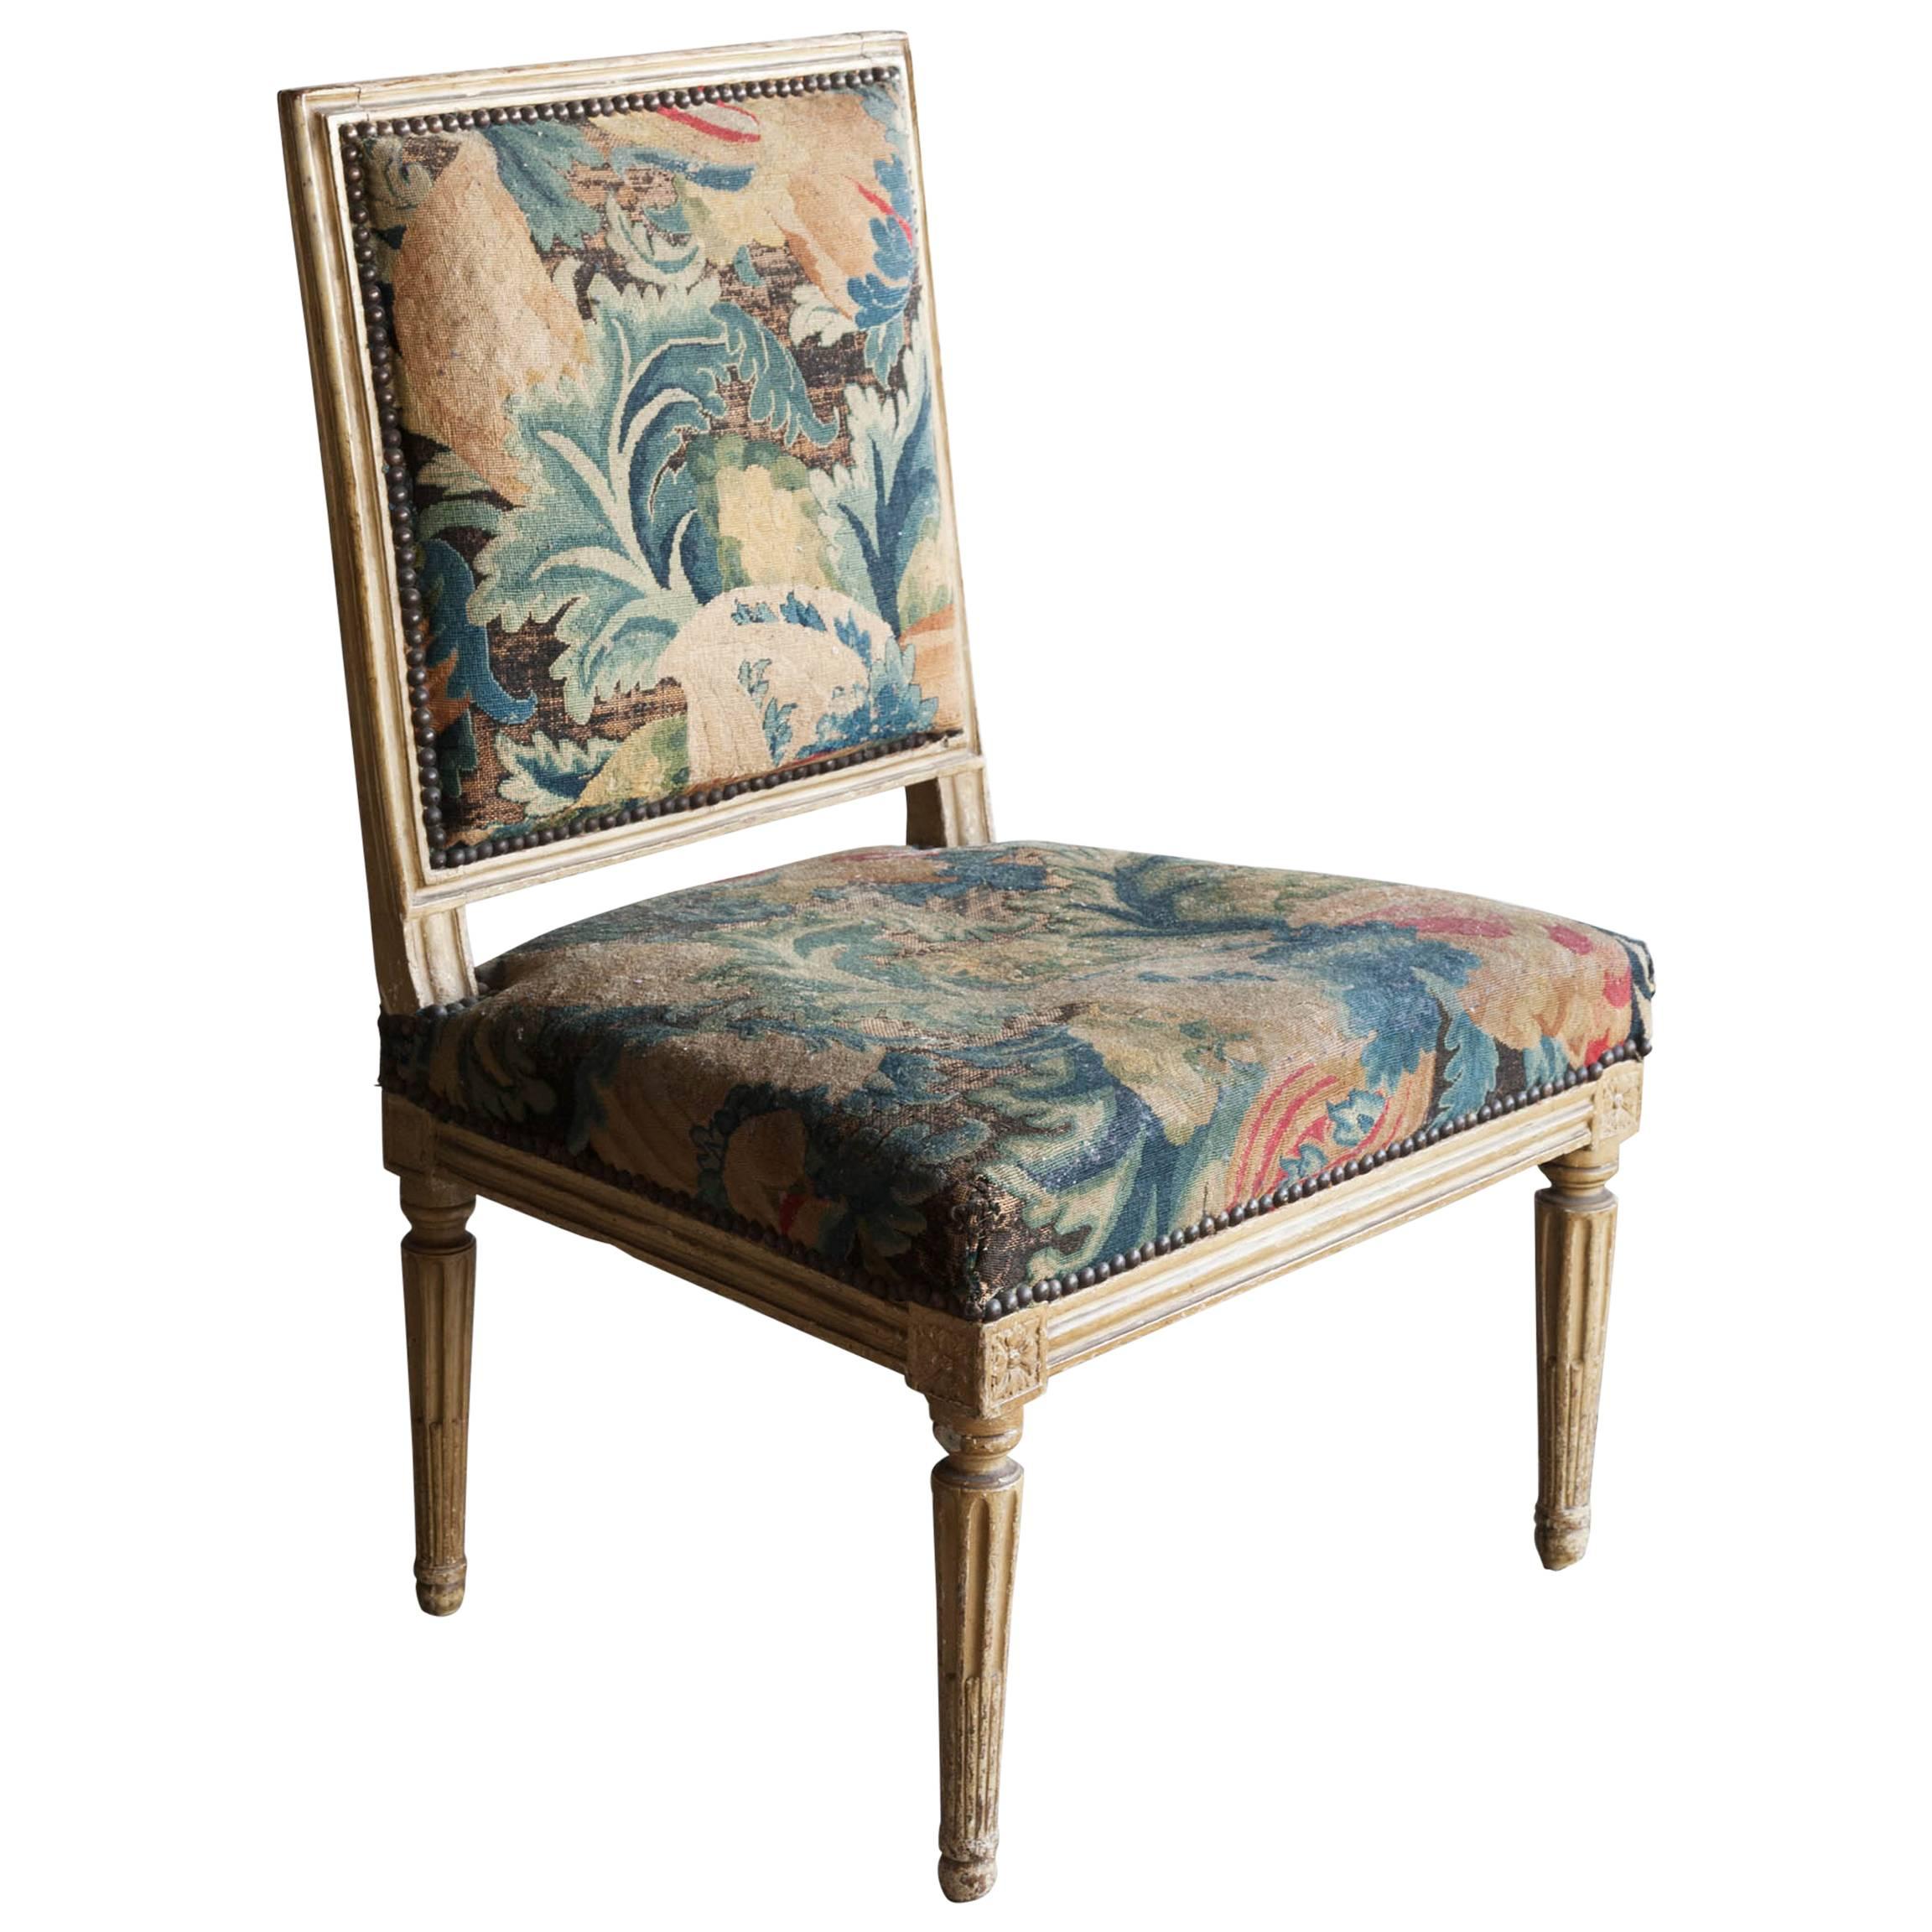 Louis XVI Period Painted Low Chair or Chauffeuse, Stamped "Séné" by the Maker